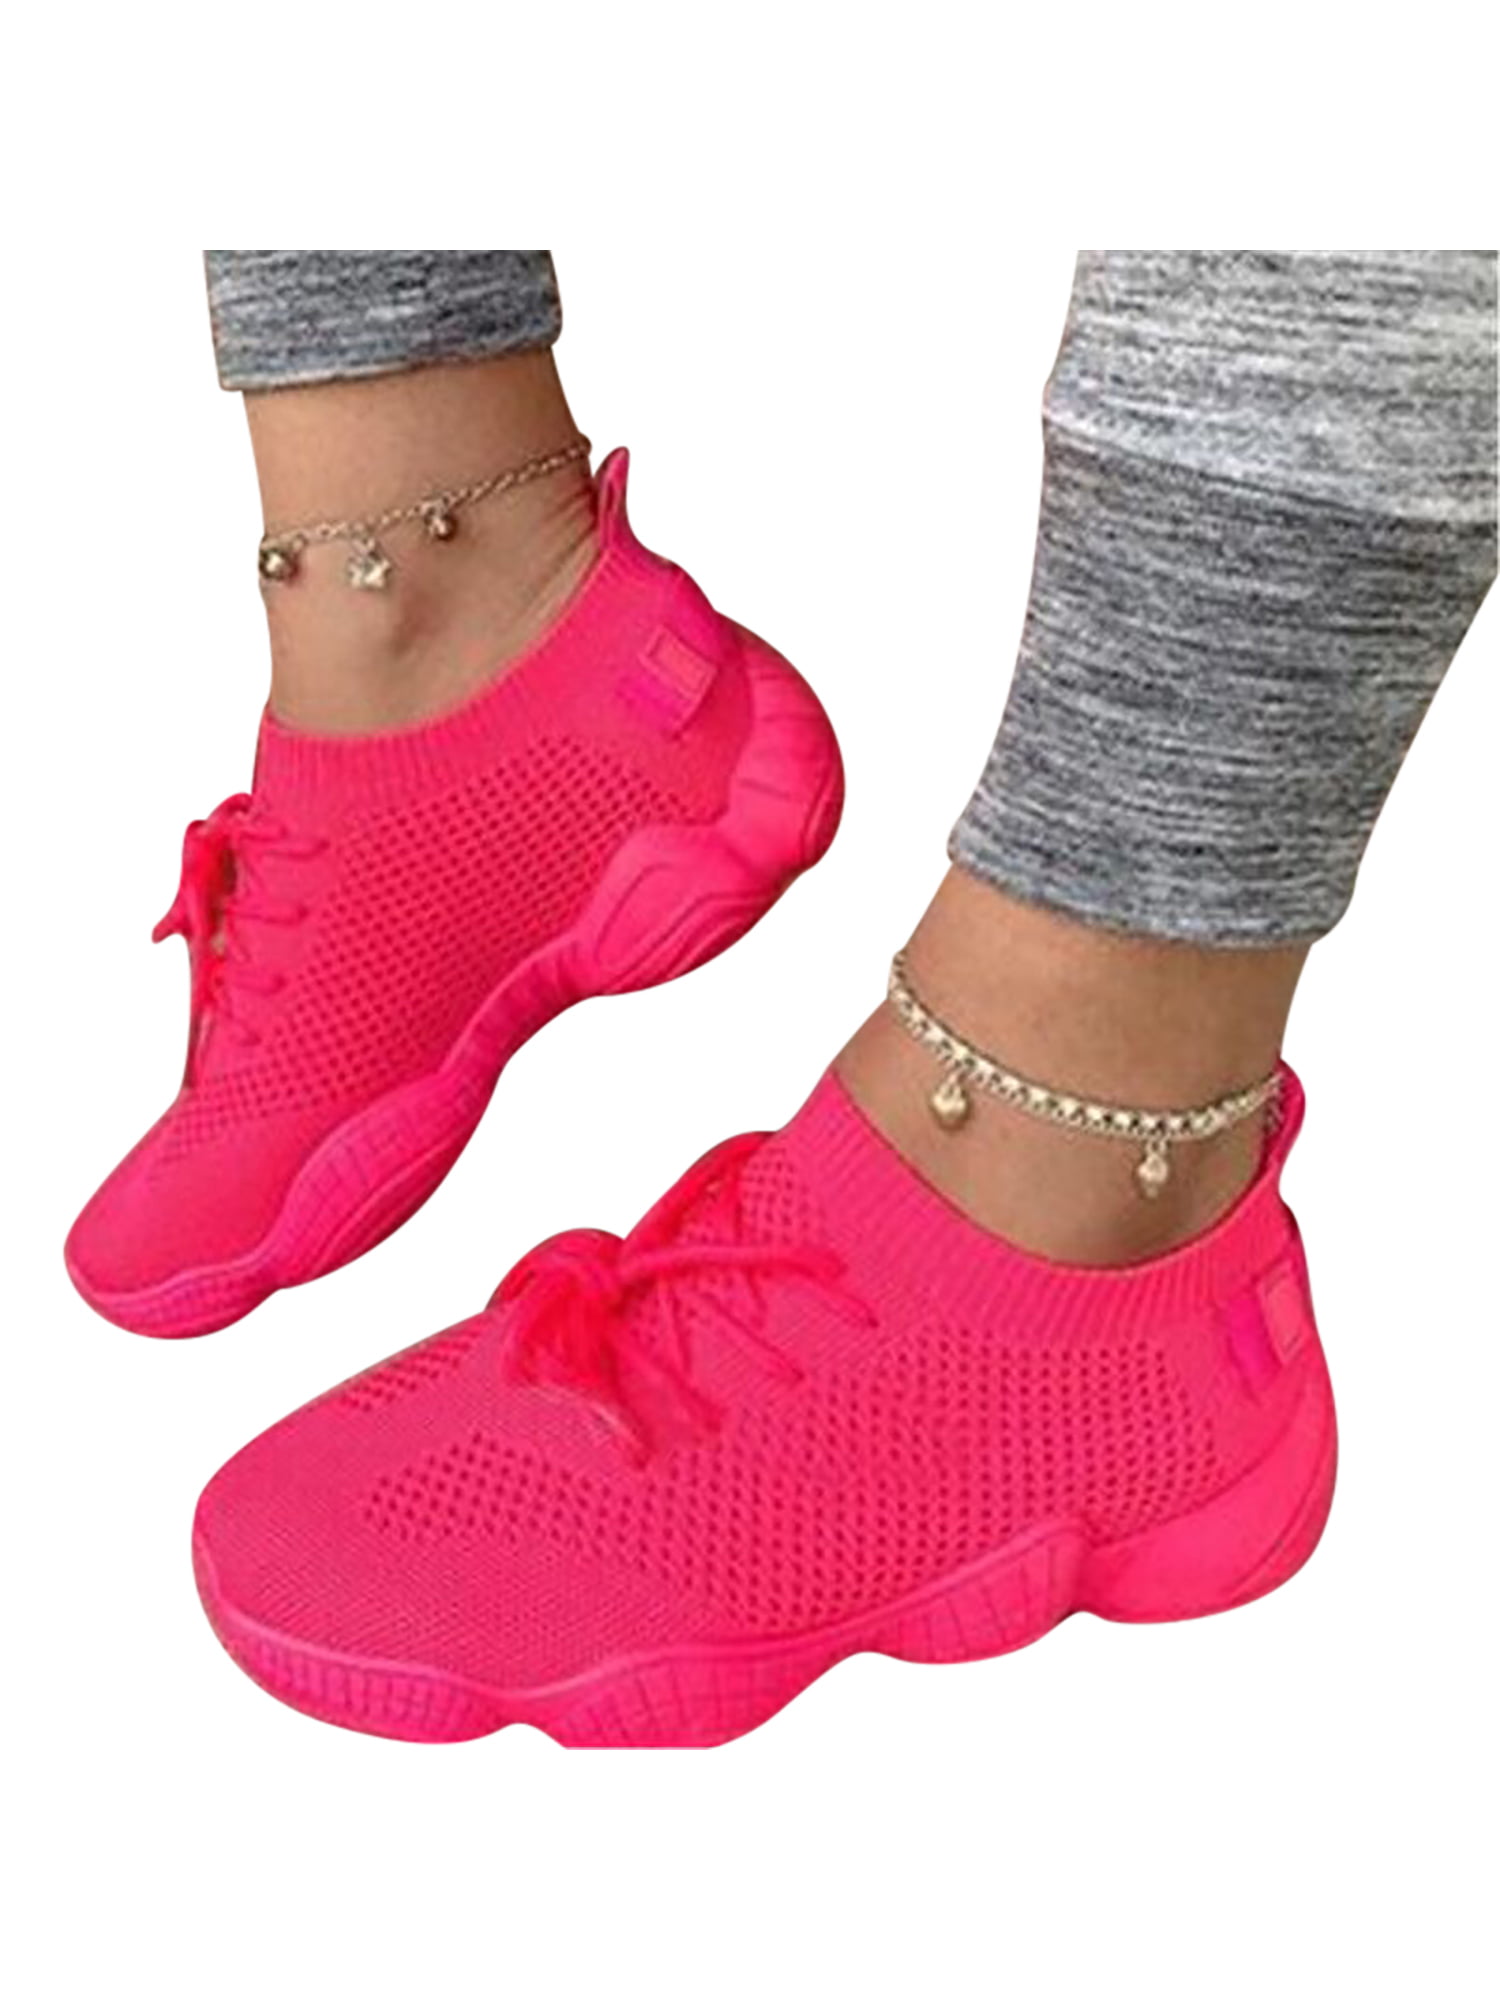 WOMENS Girls SNEAKERS Breathable MESH RUNNING WALKING CASUAL Iridescent SHOES 